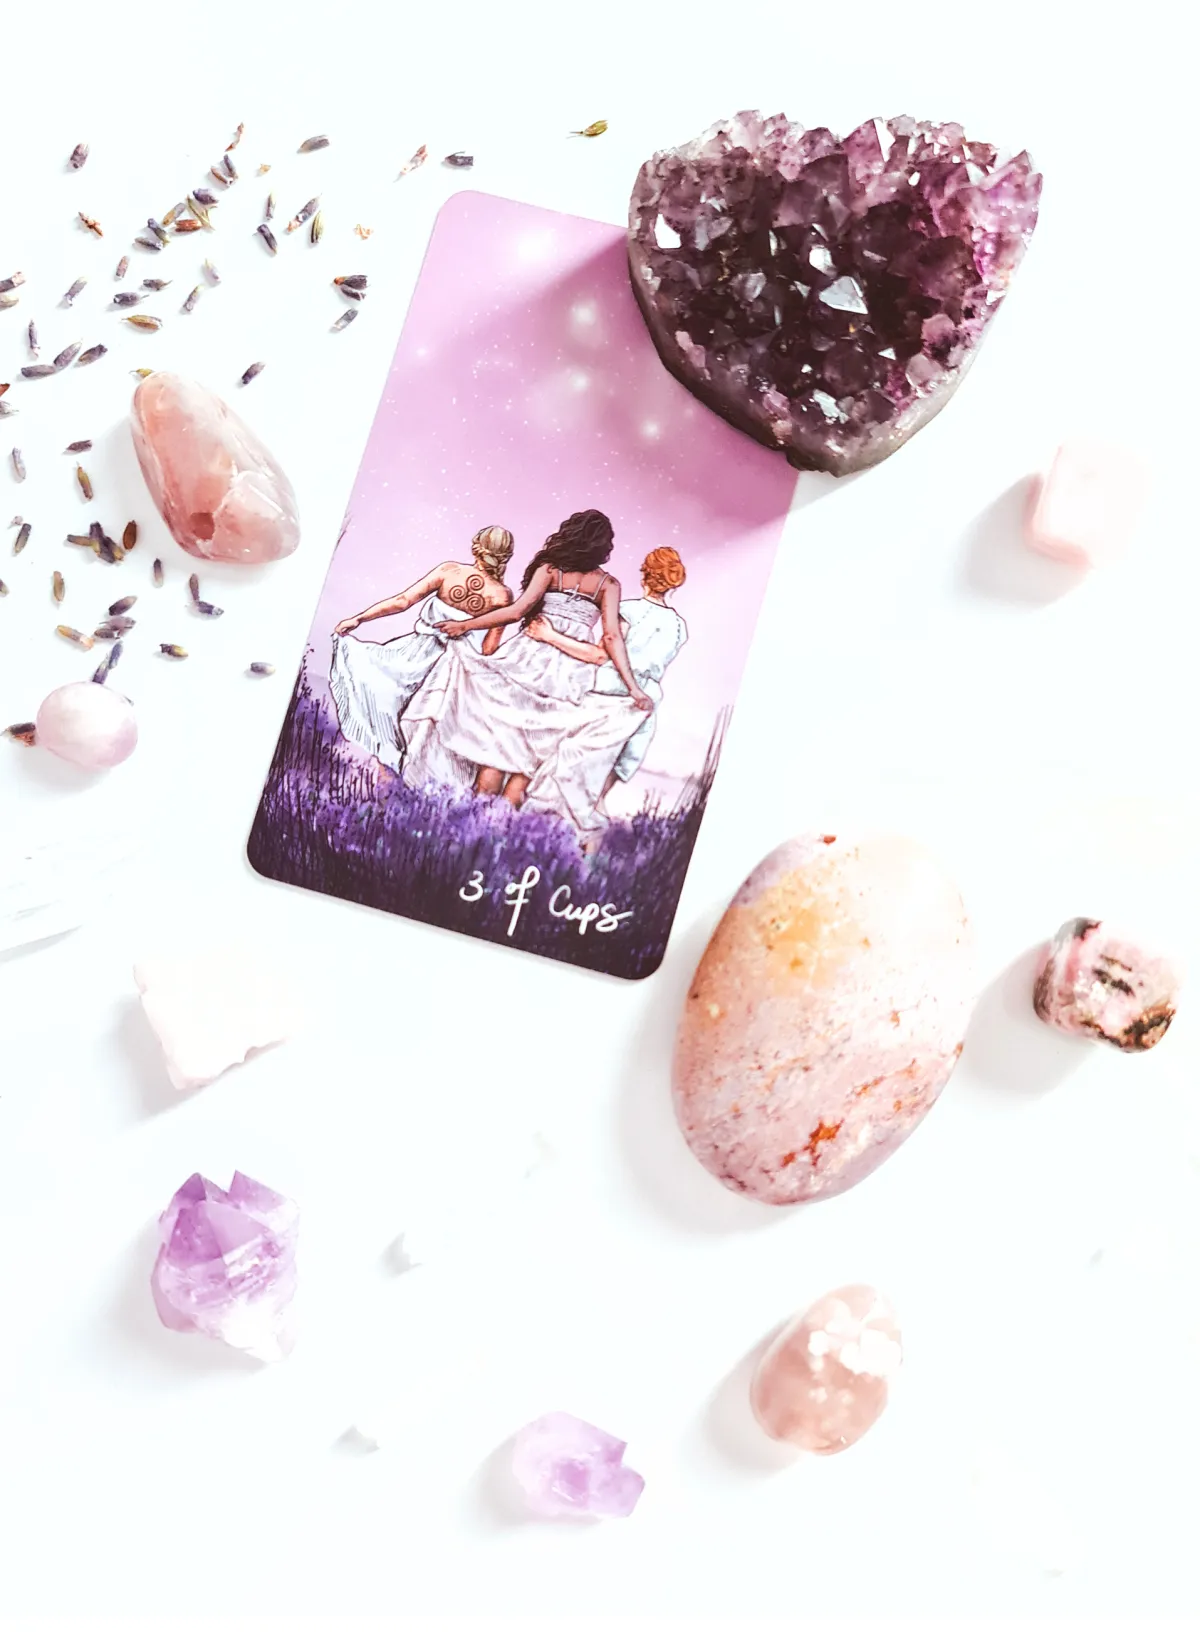  The Three of Cups tarot card embodies the joy, celebration, and connection found in Always on My Way's coworking sessions. Embrace the power of collaboration and shared experiences in these uplifting gatherings.